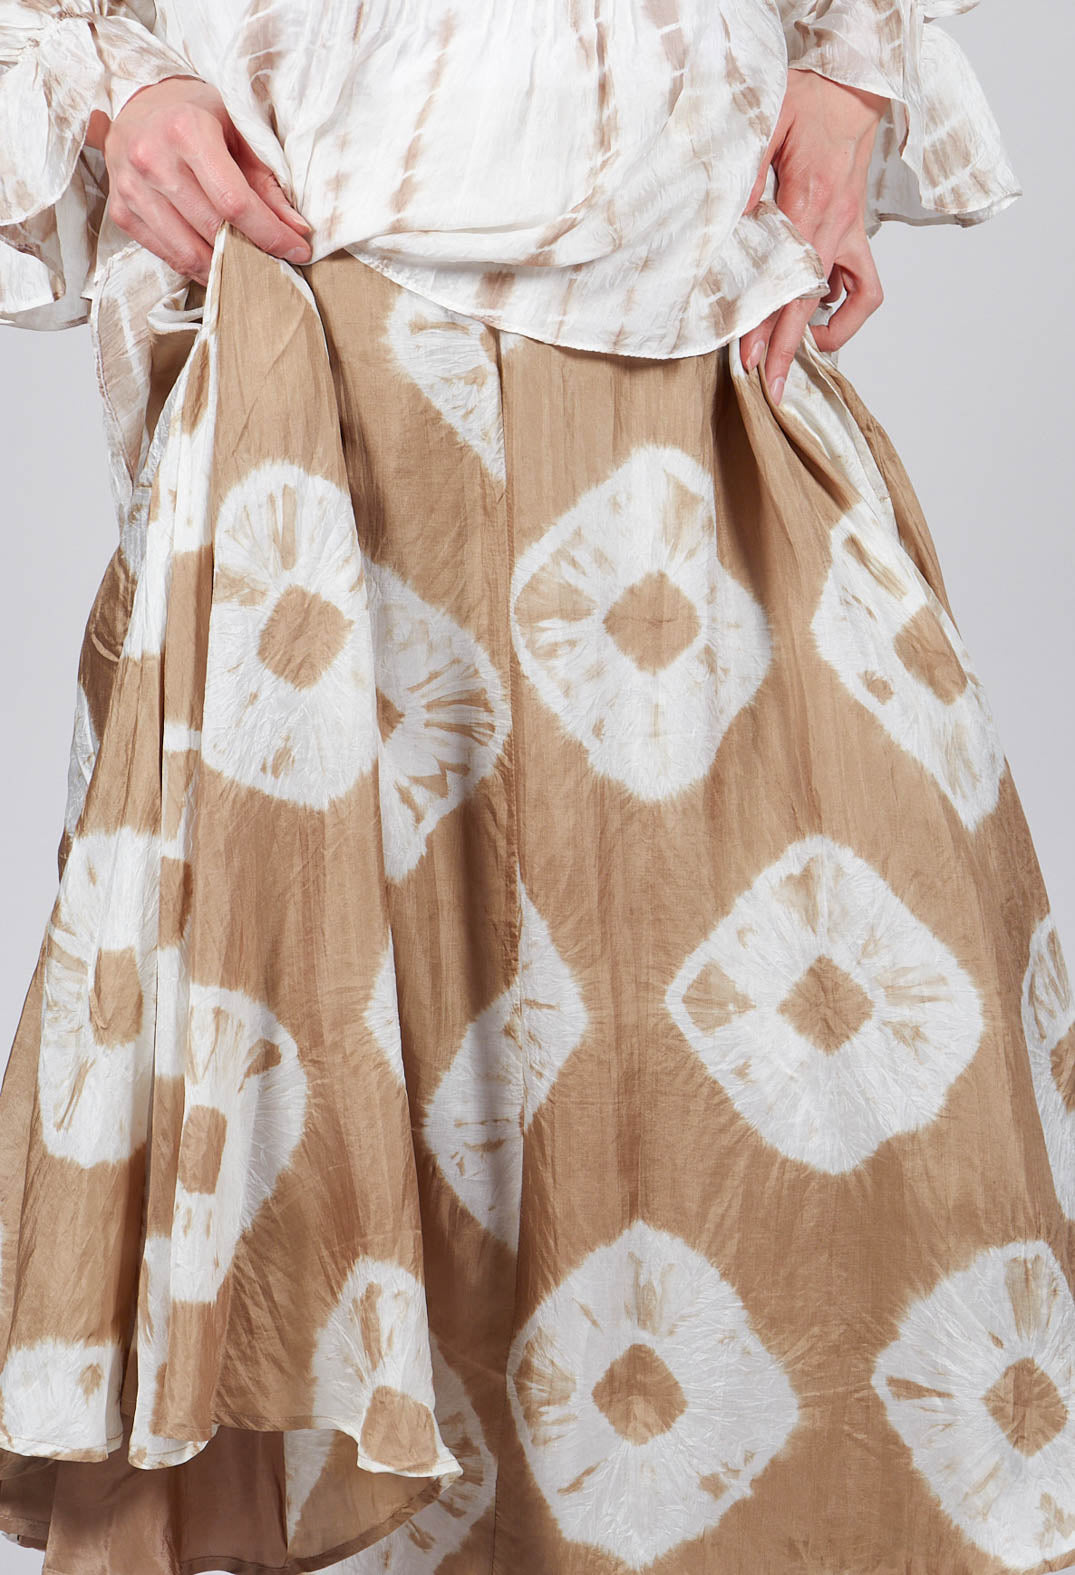 Lotus Skirt in Beige and Cream